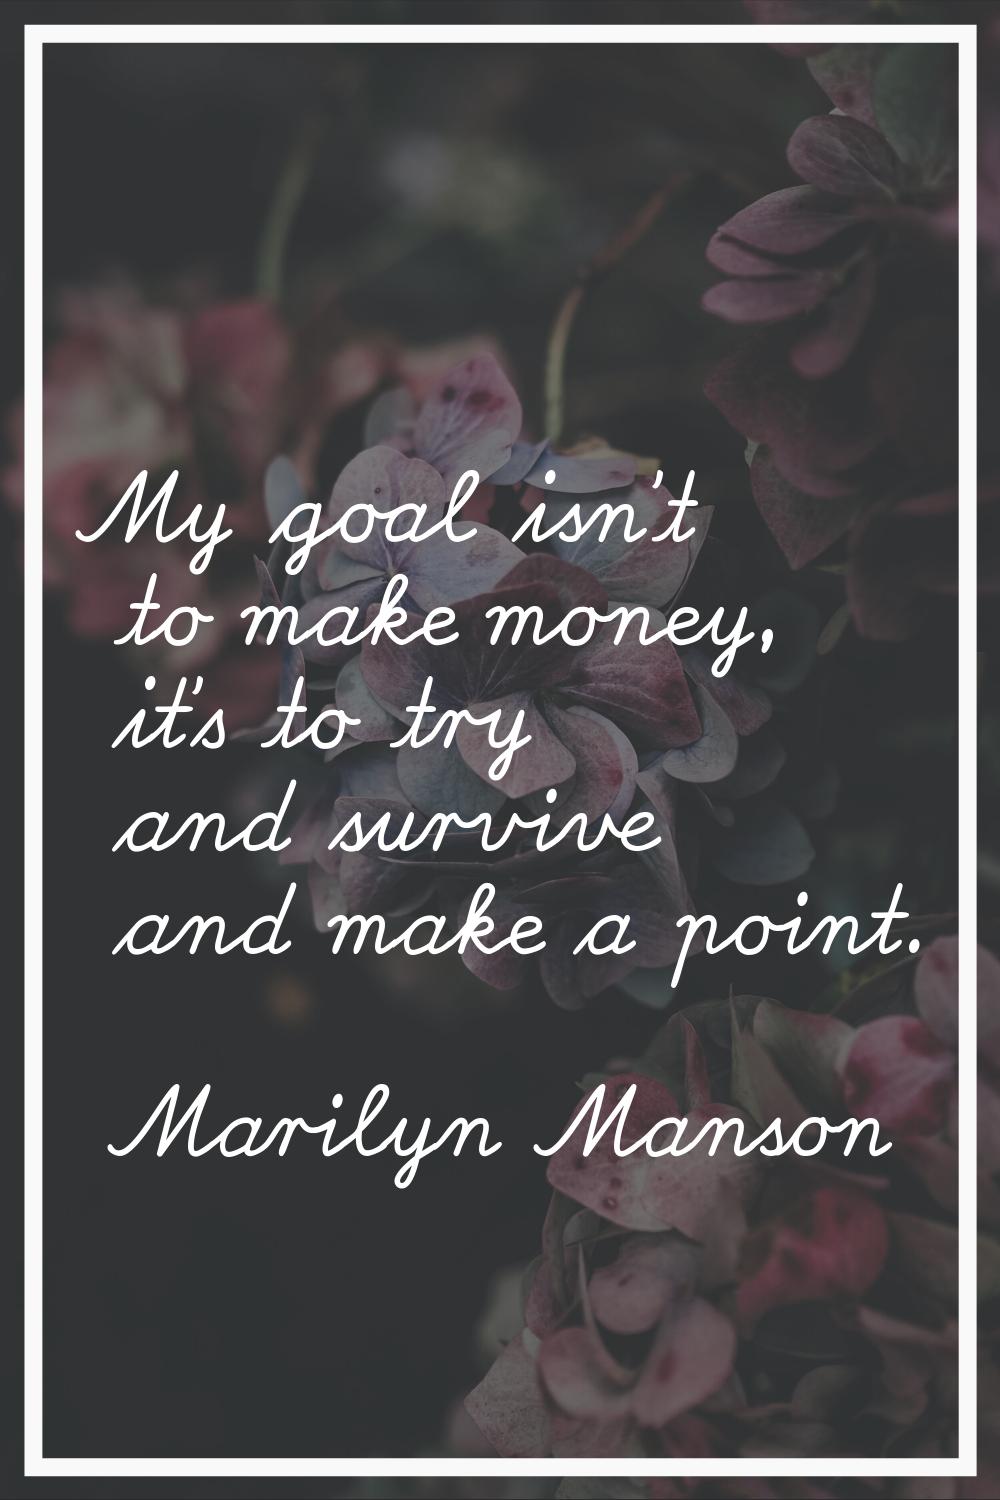 My goal isn't to make money, it's to try and survive and make a point.